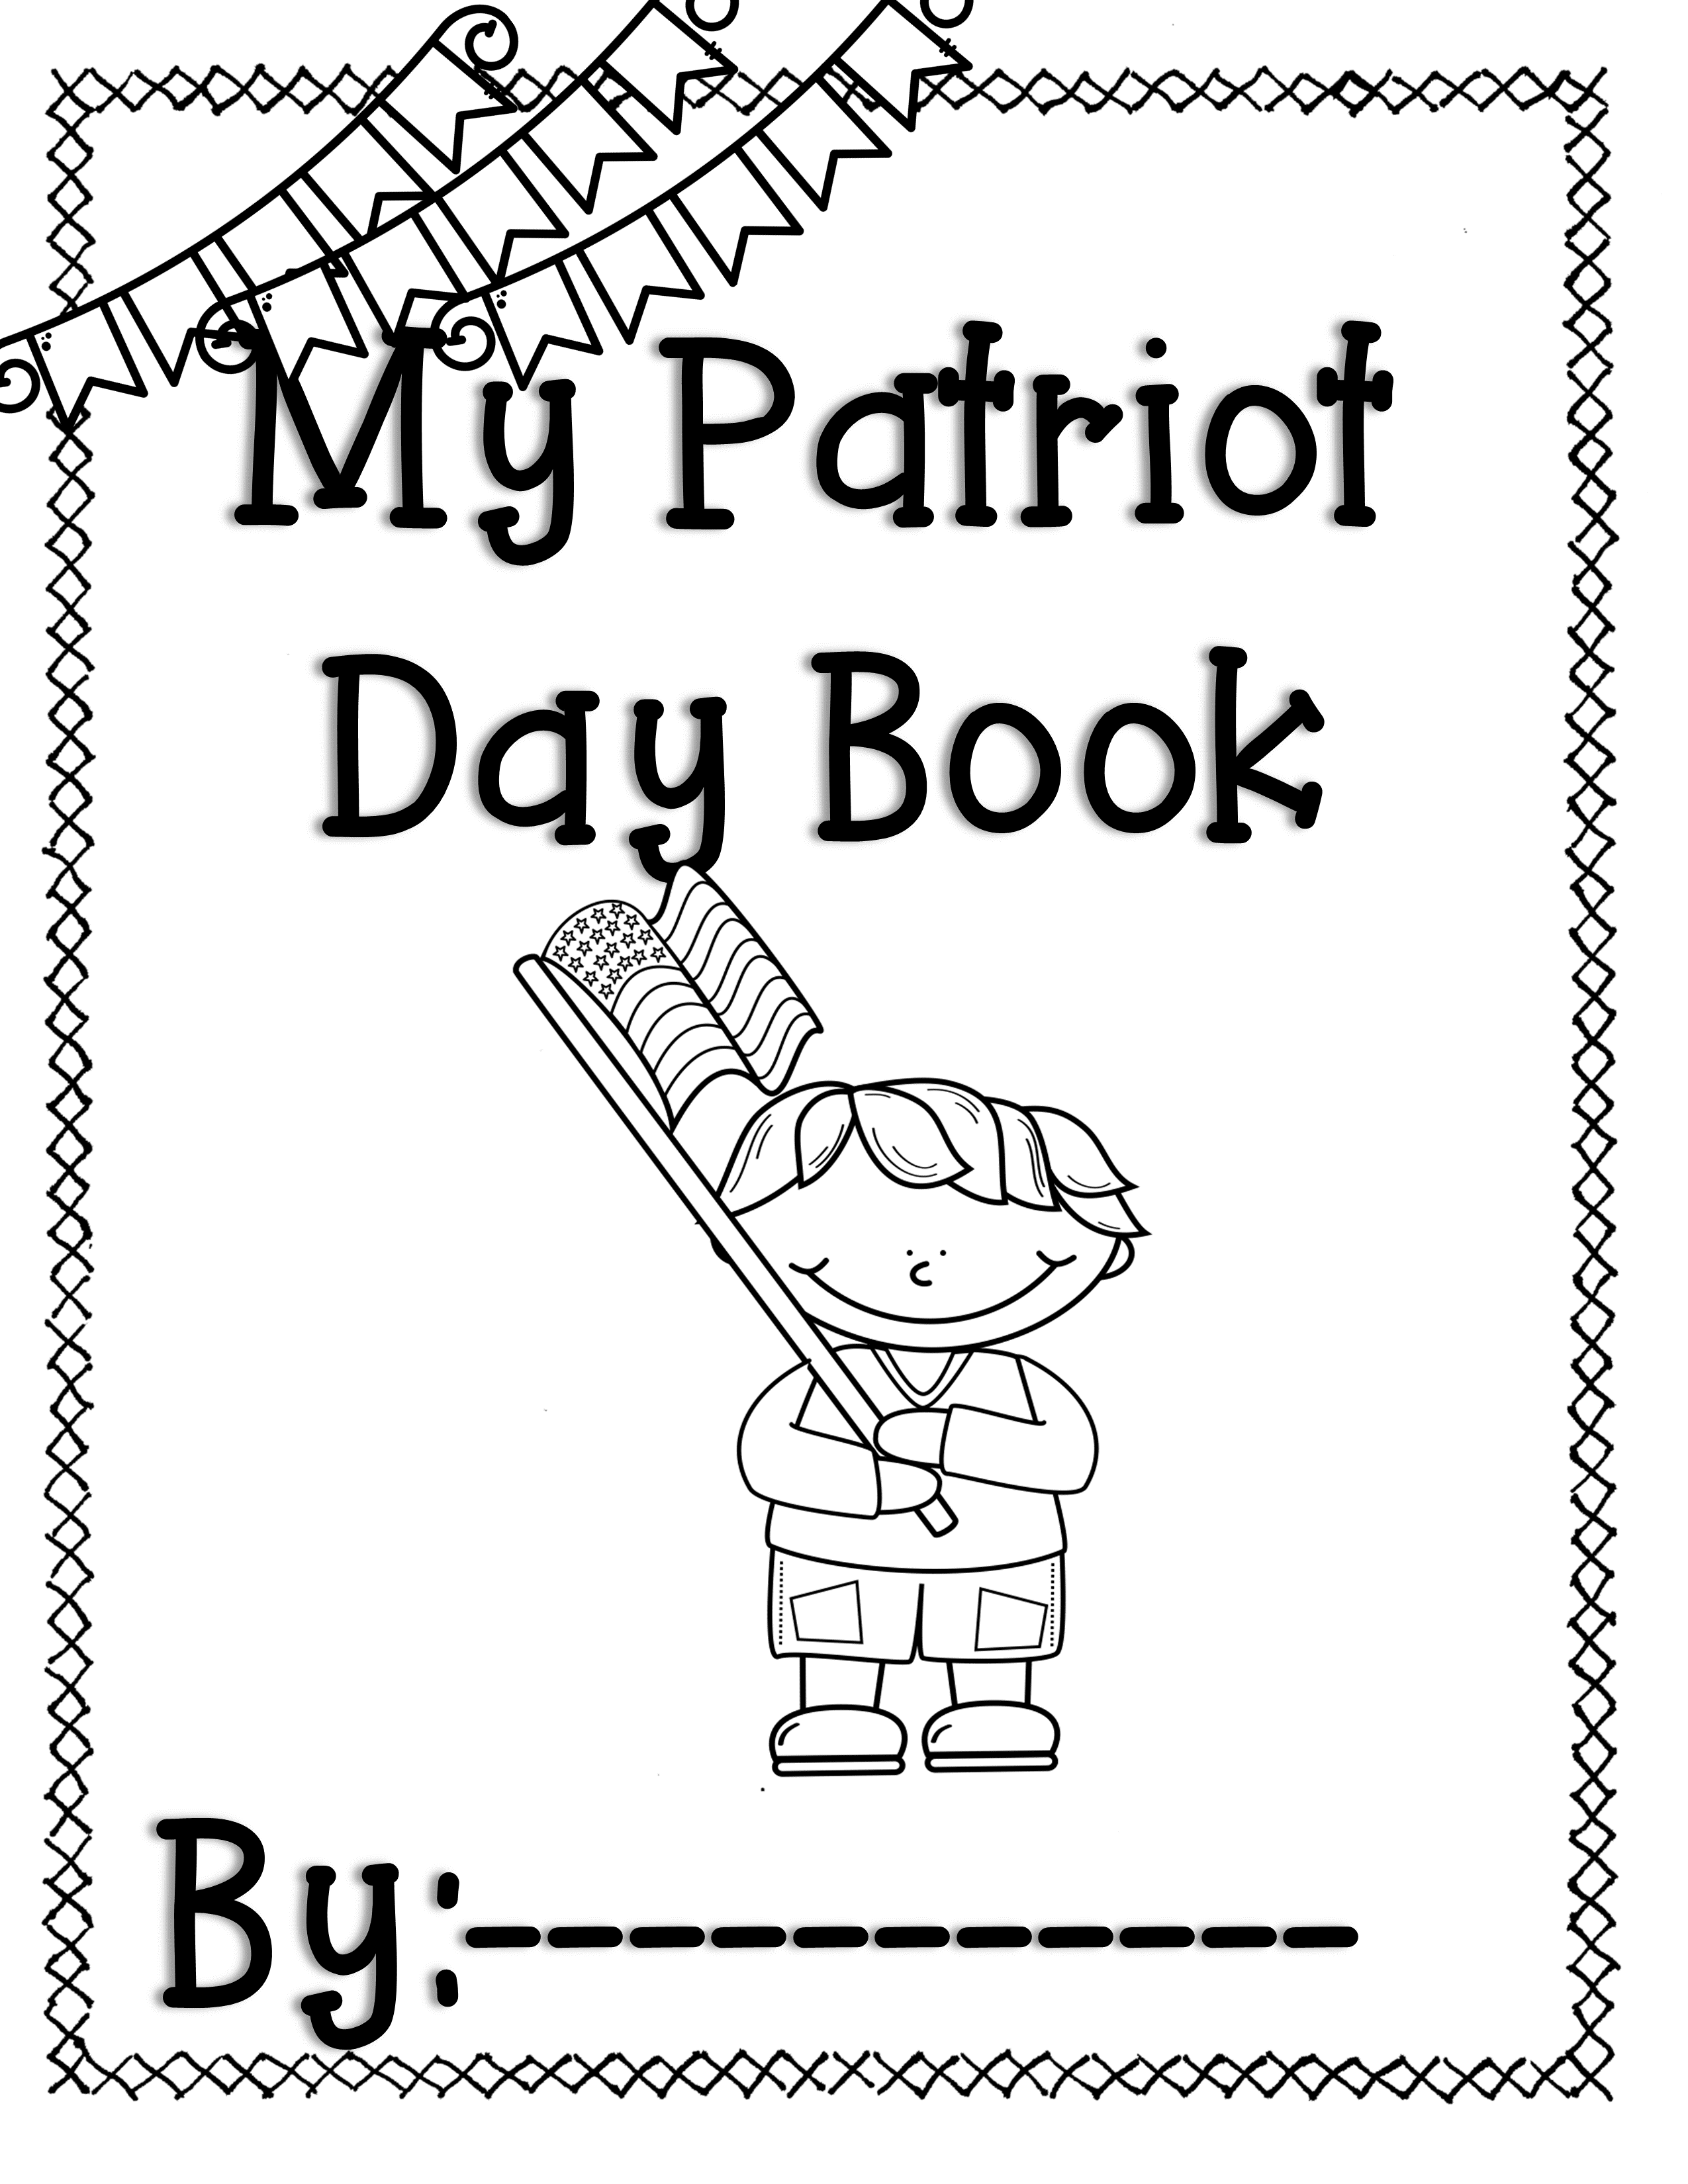 Patriot day printable book for primary grades september made by teachers